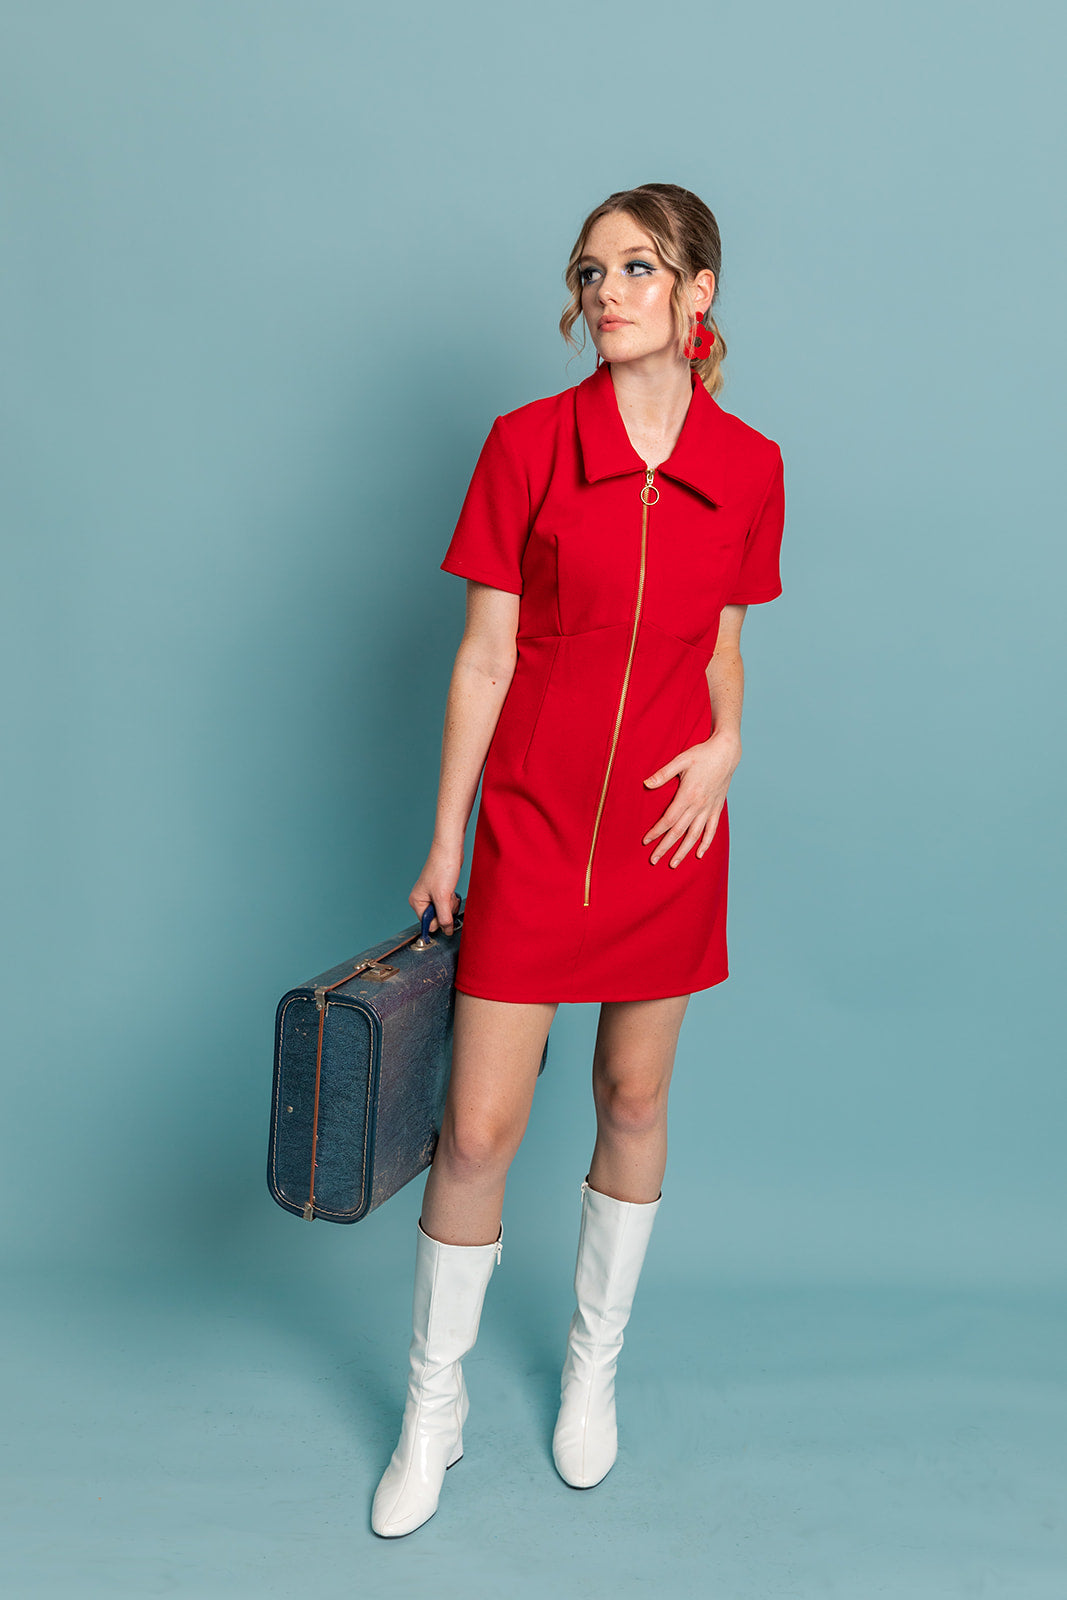 Closet Mod red short sleeve zip up mini dress with gold ring zip and collar